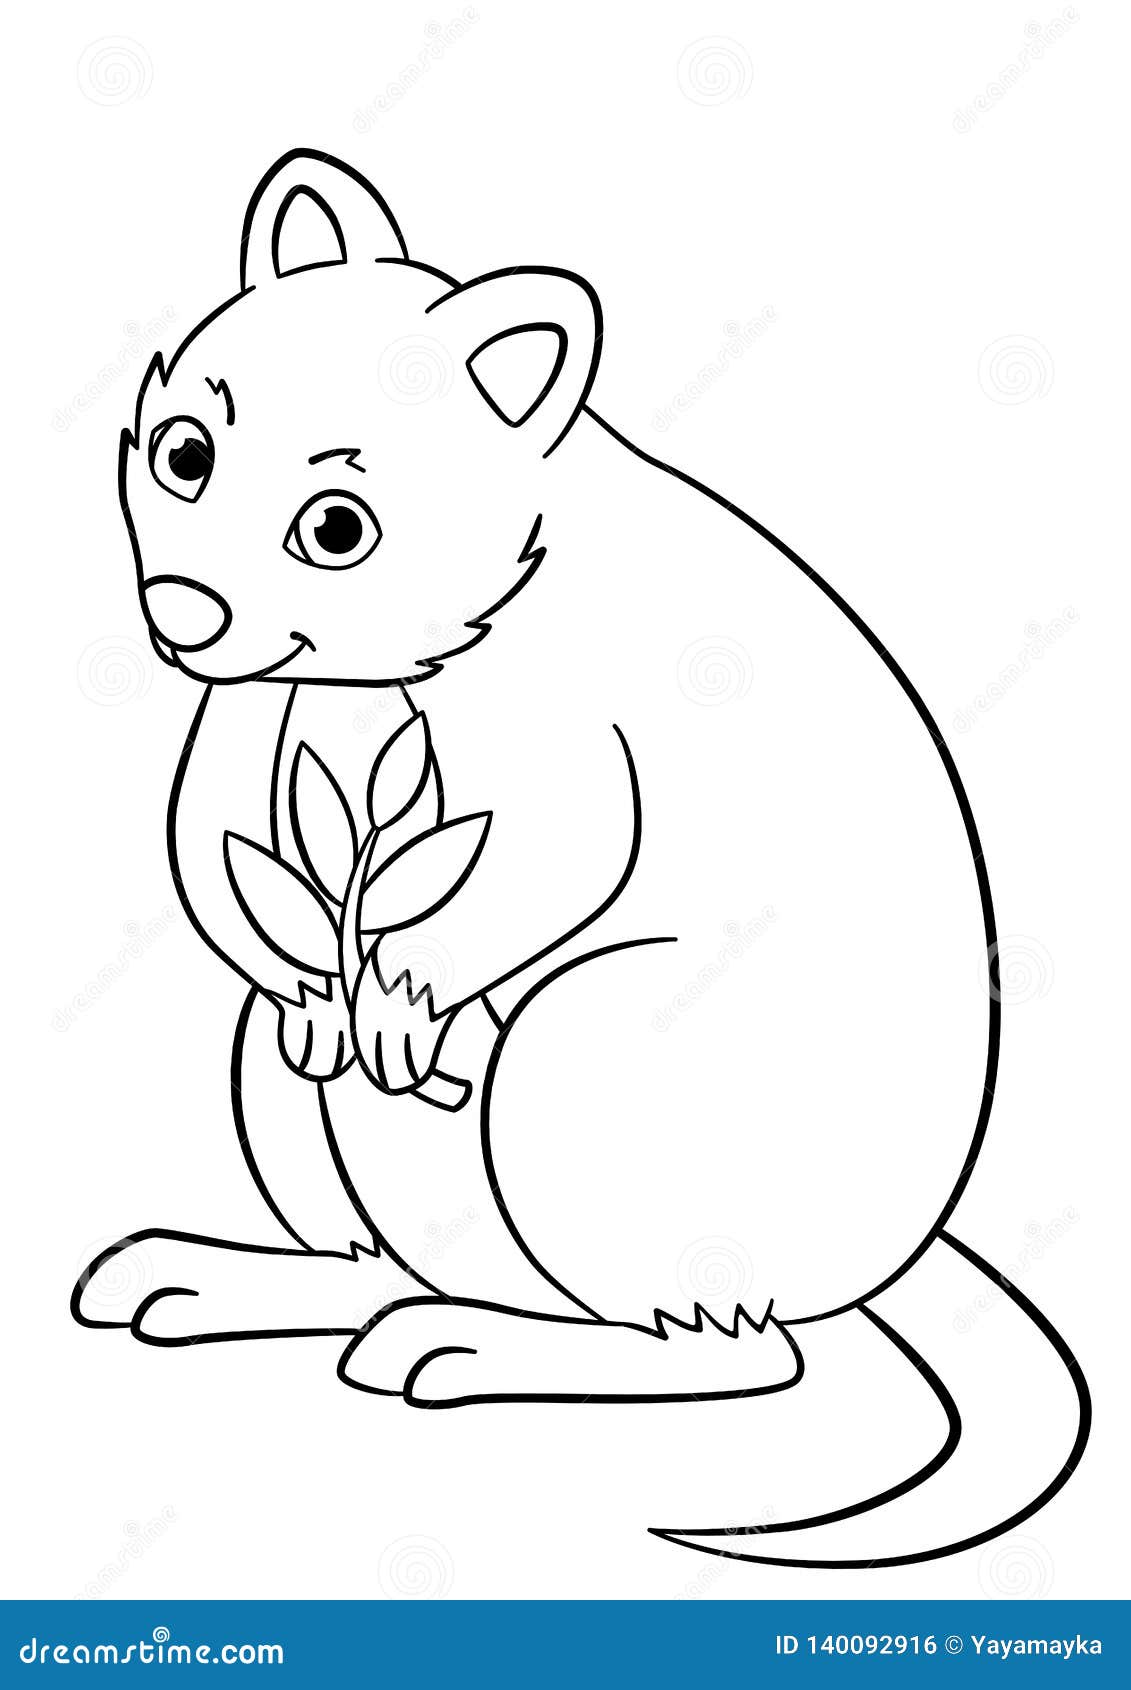 Quokka Coloring Book: Easy Quokka Coloring Books For Kids And Adults  Relaxing